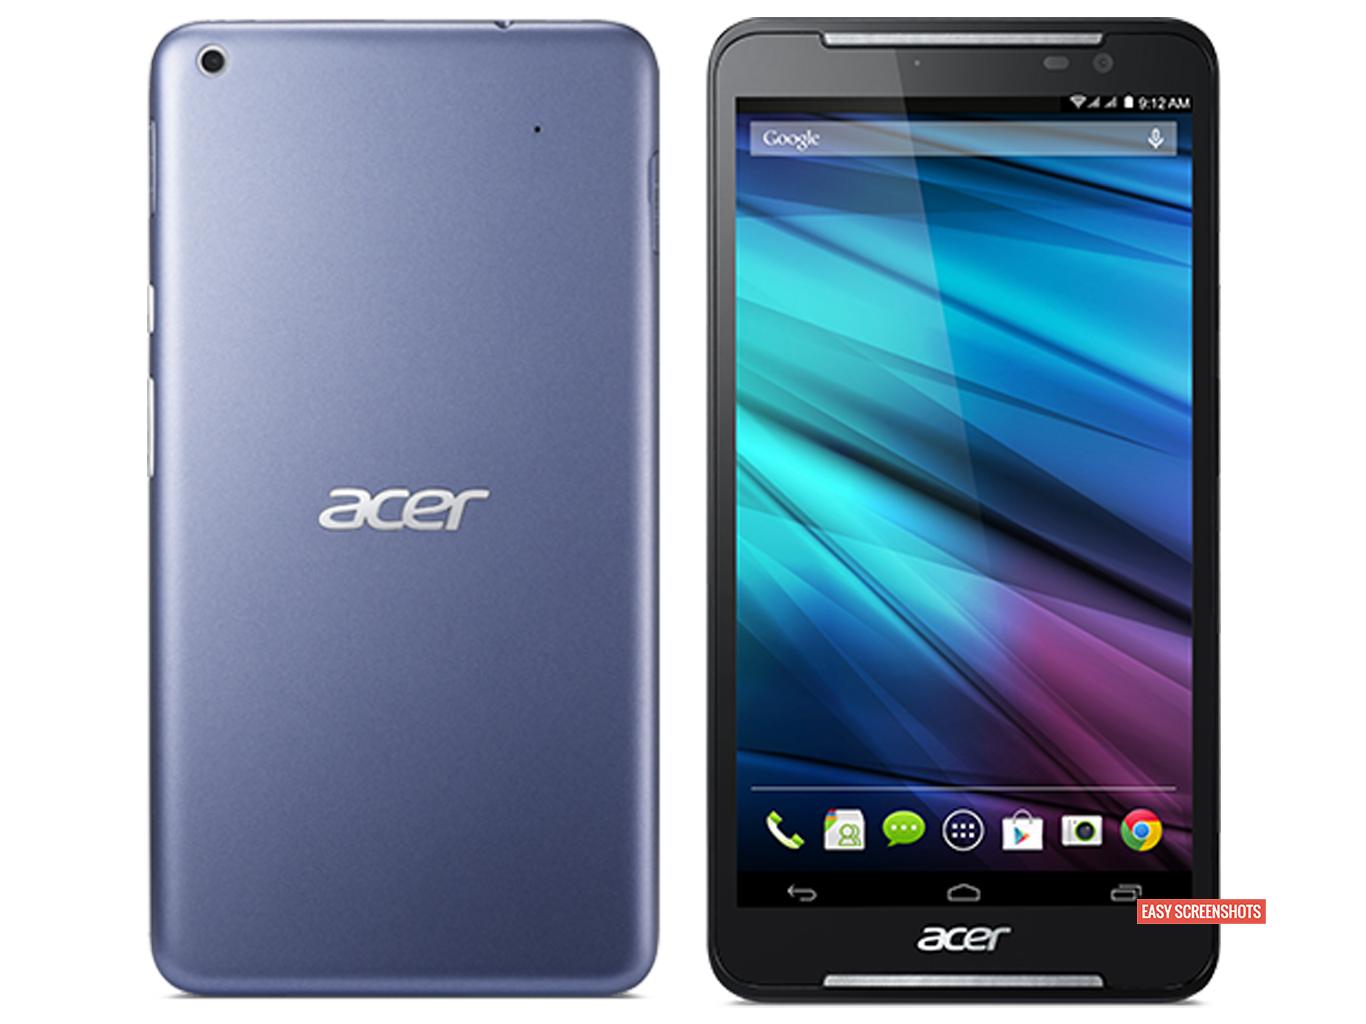 How to take screenshot picture on Acer Iconia Talk S